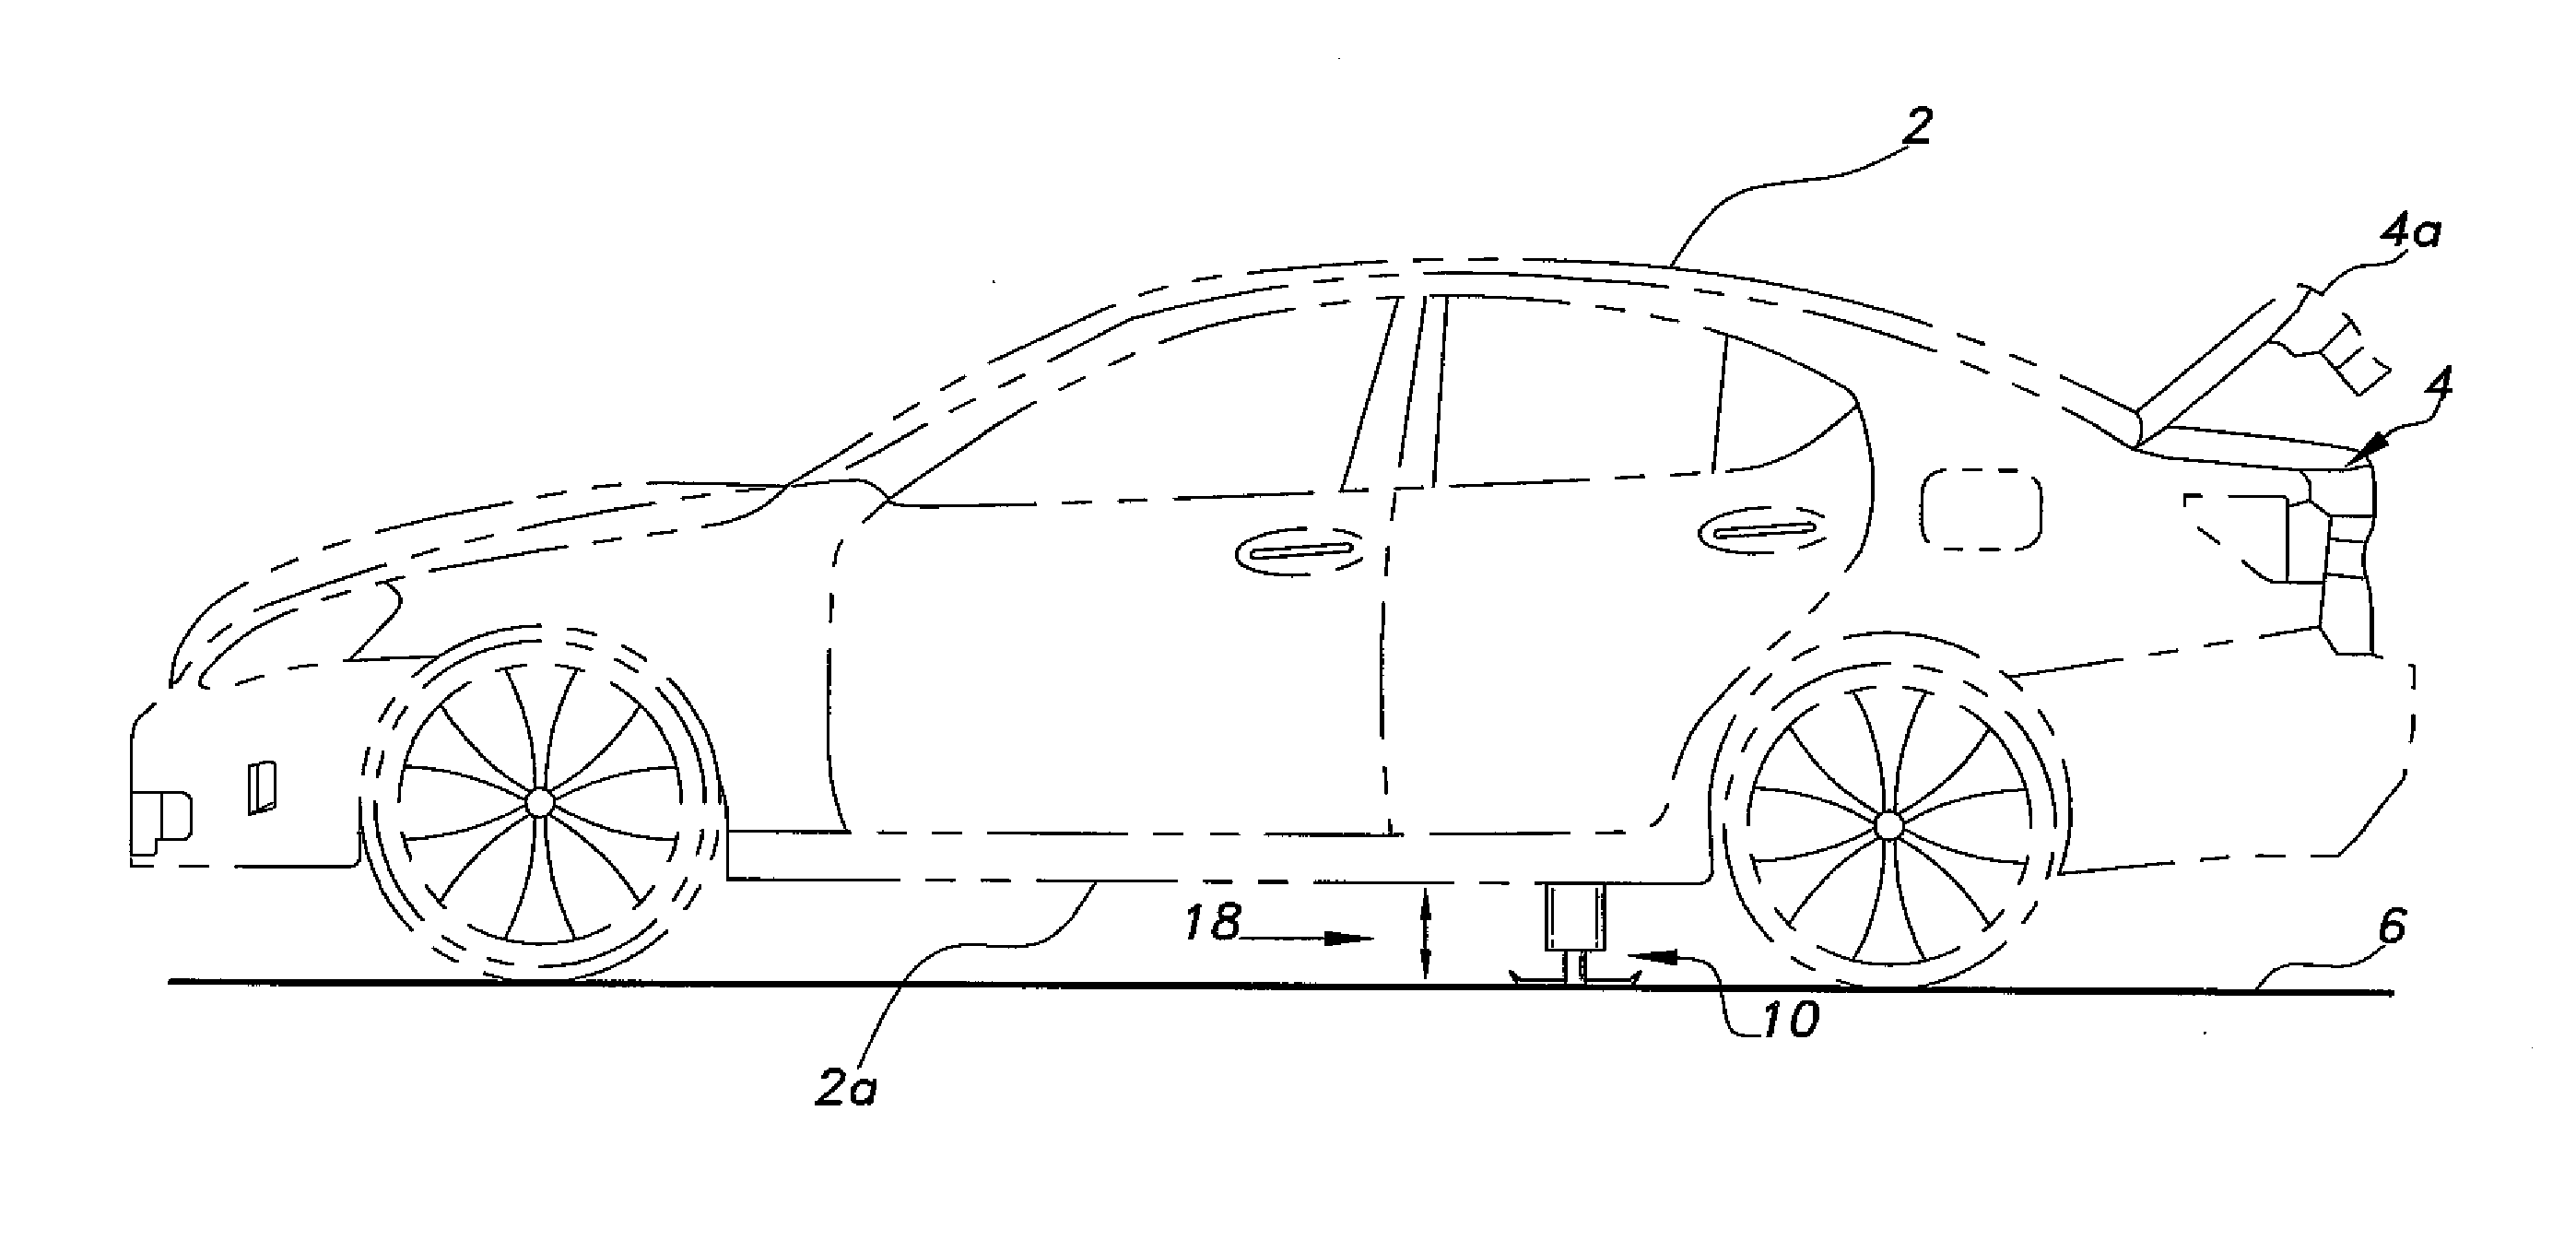 Vehicle with integral tire jacks